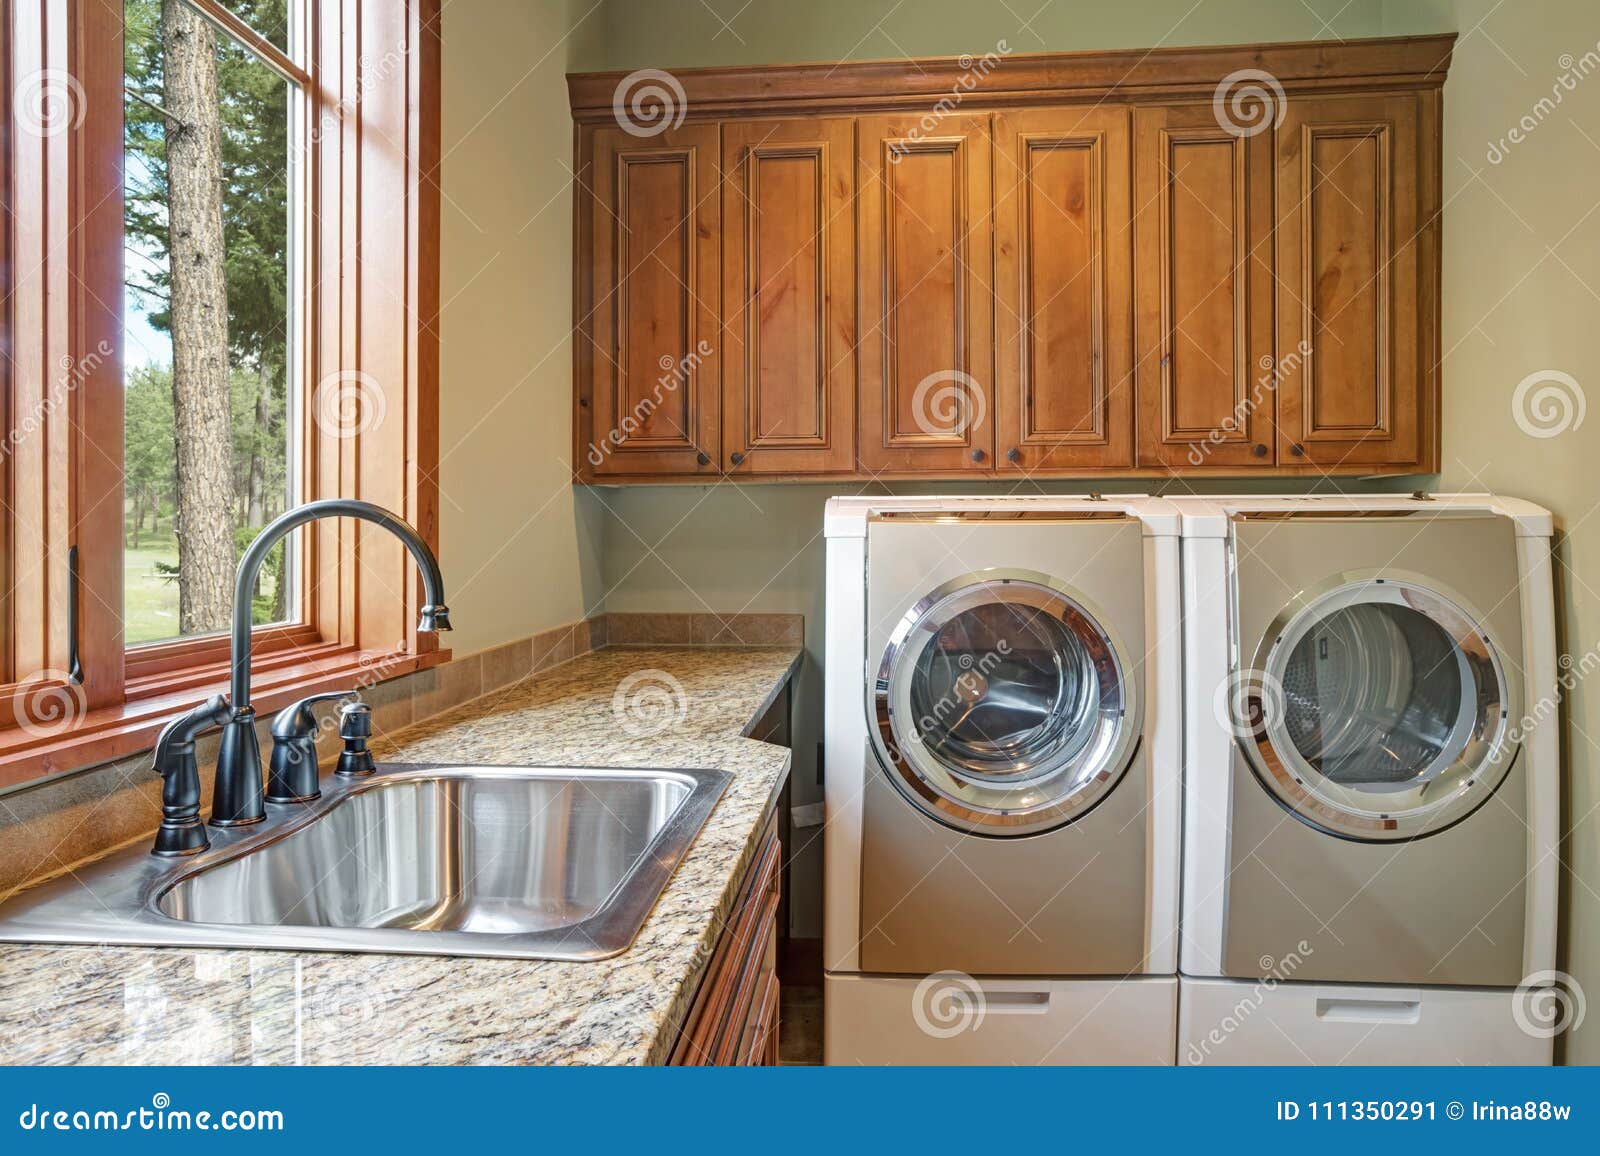 Huge Laundry Room With White Washer And Dryer Stock Image Image